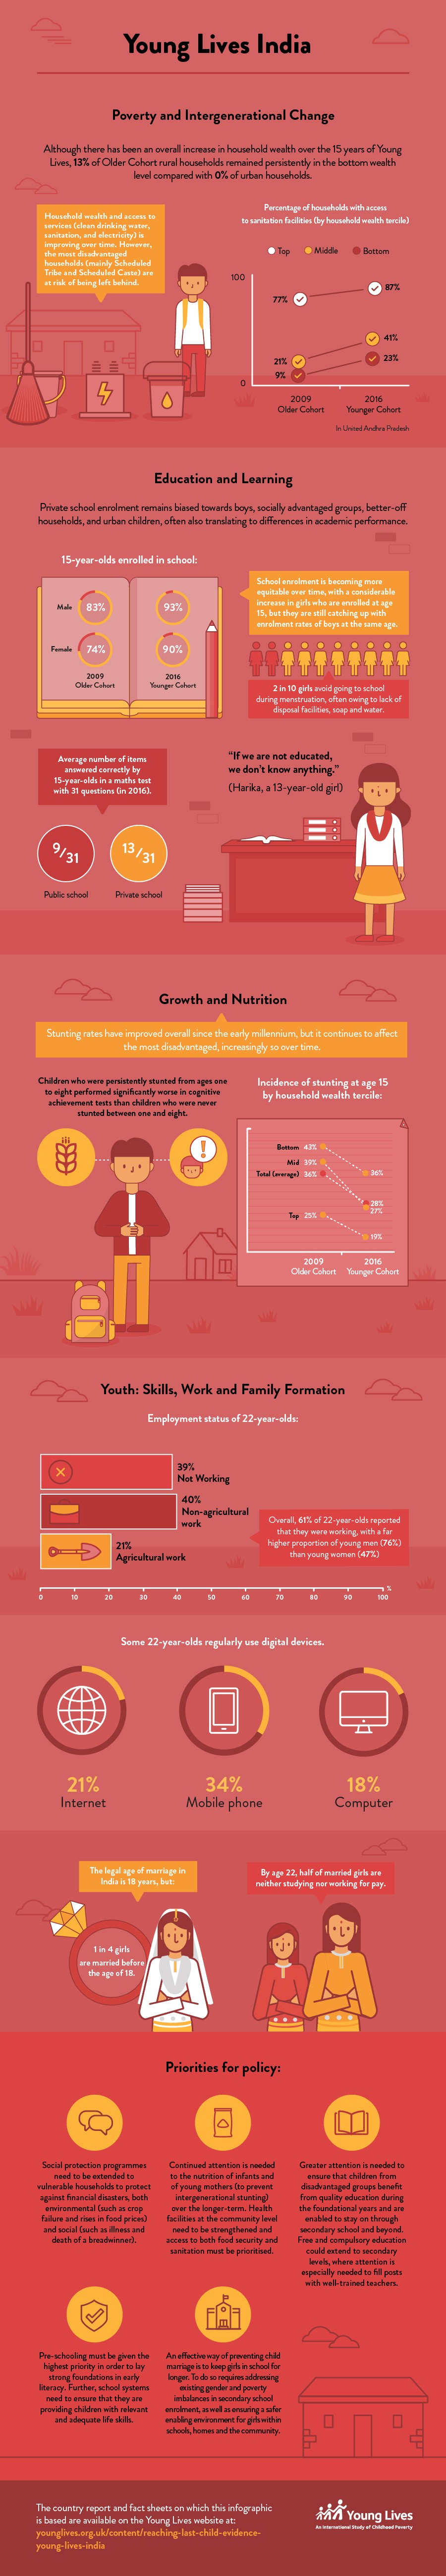 Young Lives composite infographic